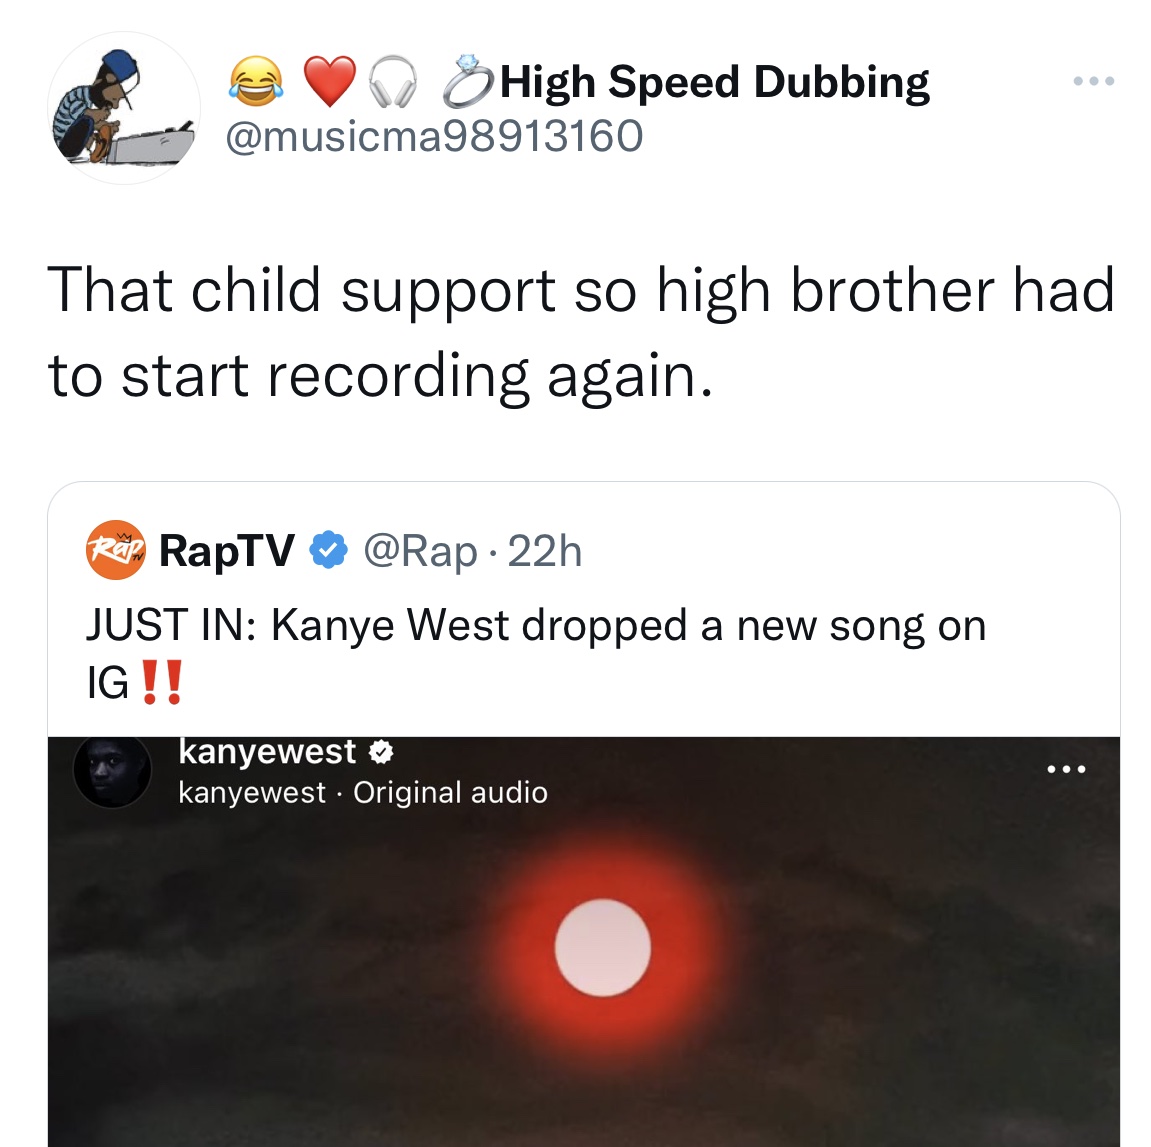 Tweets dunking on celebs - j dilla schroeder - High Speed Dubbing That child support so high brother had to start recording again. Rap RapTV Just In Kanye West dropped a new song on Ig !! kanyewest kanyewest Original audio